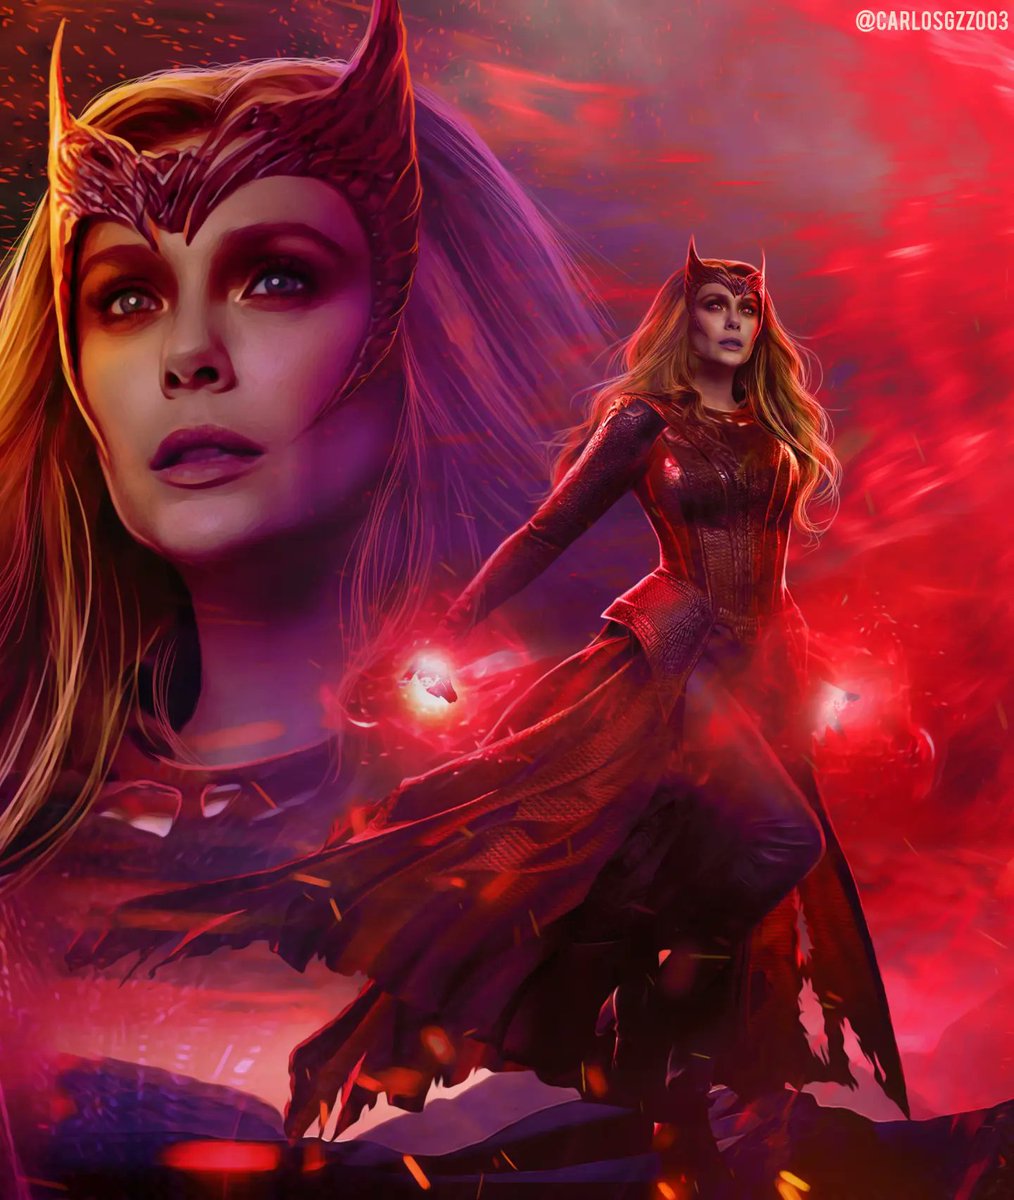 The cosplayer.       The character 

#scarletwitch